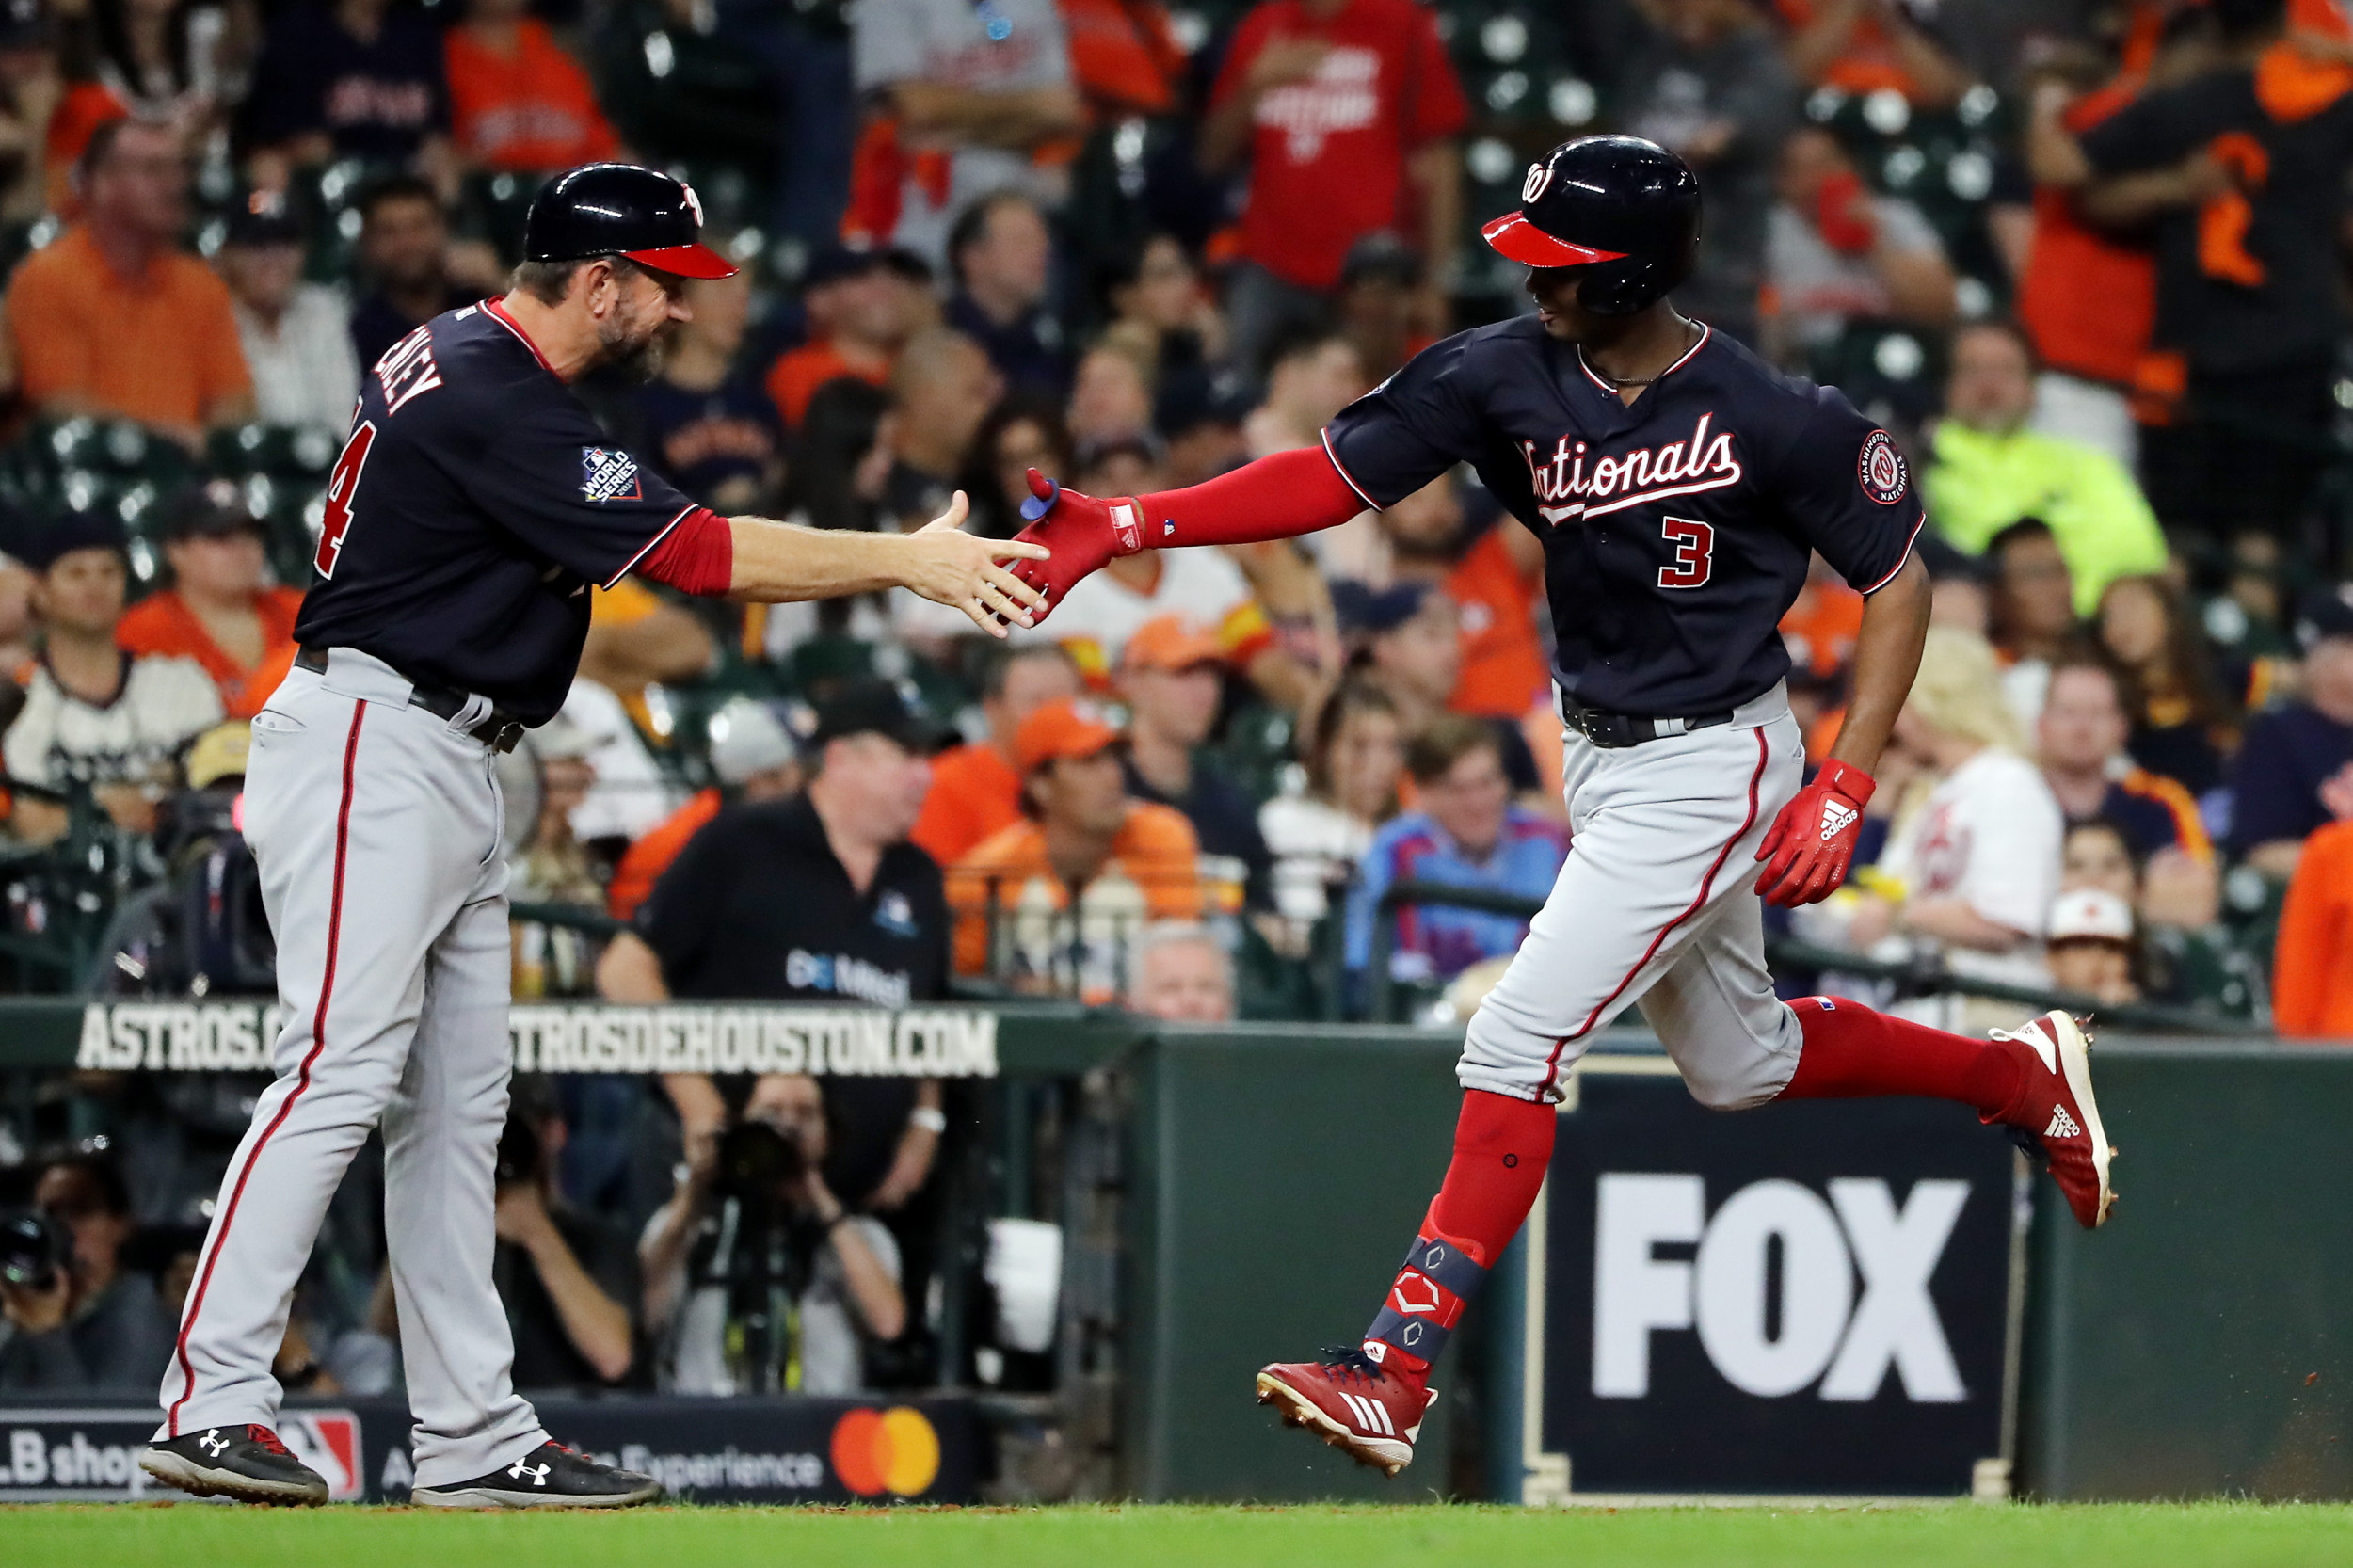 2019 World Series Where to Watch Astros vs. Nationals Game 3, TV